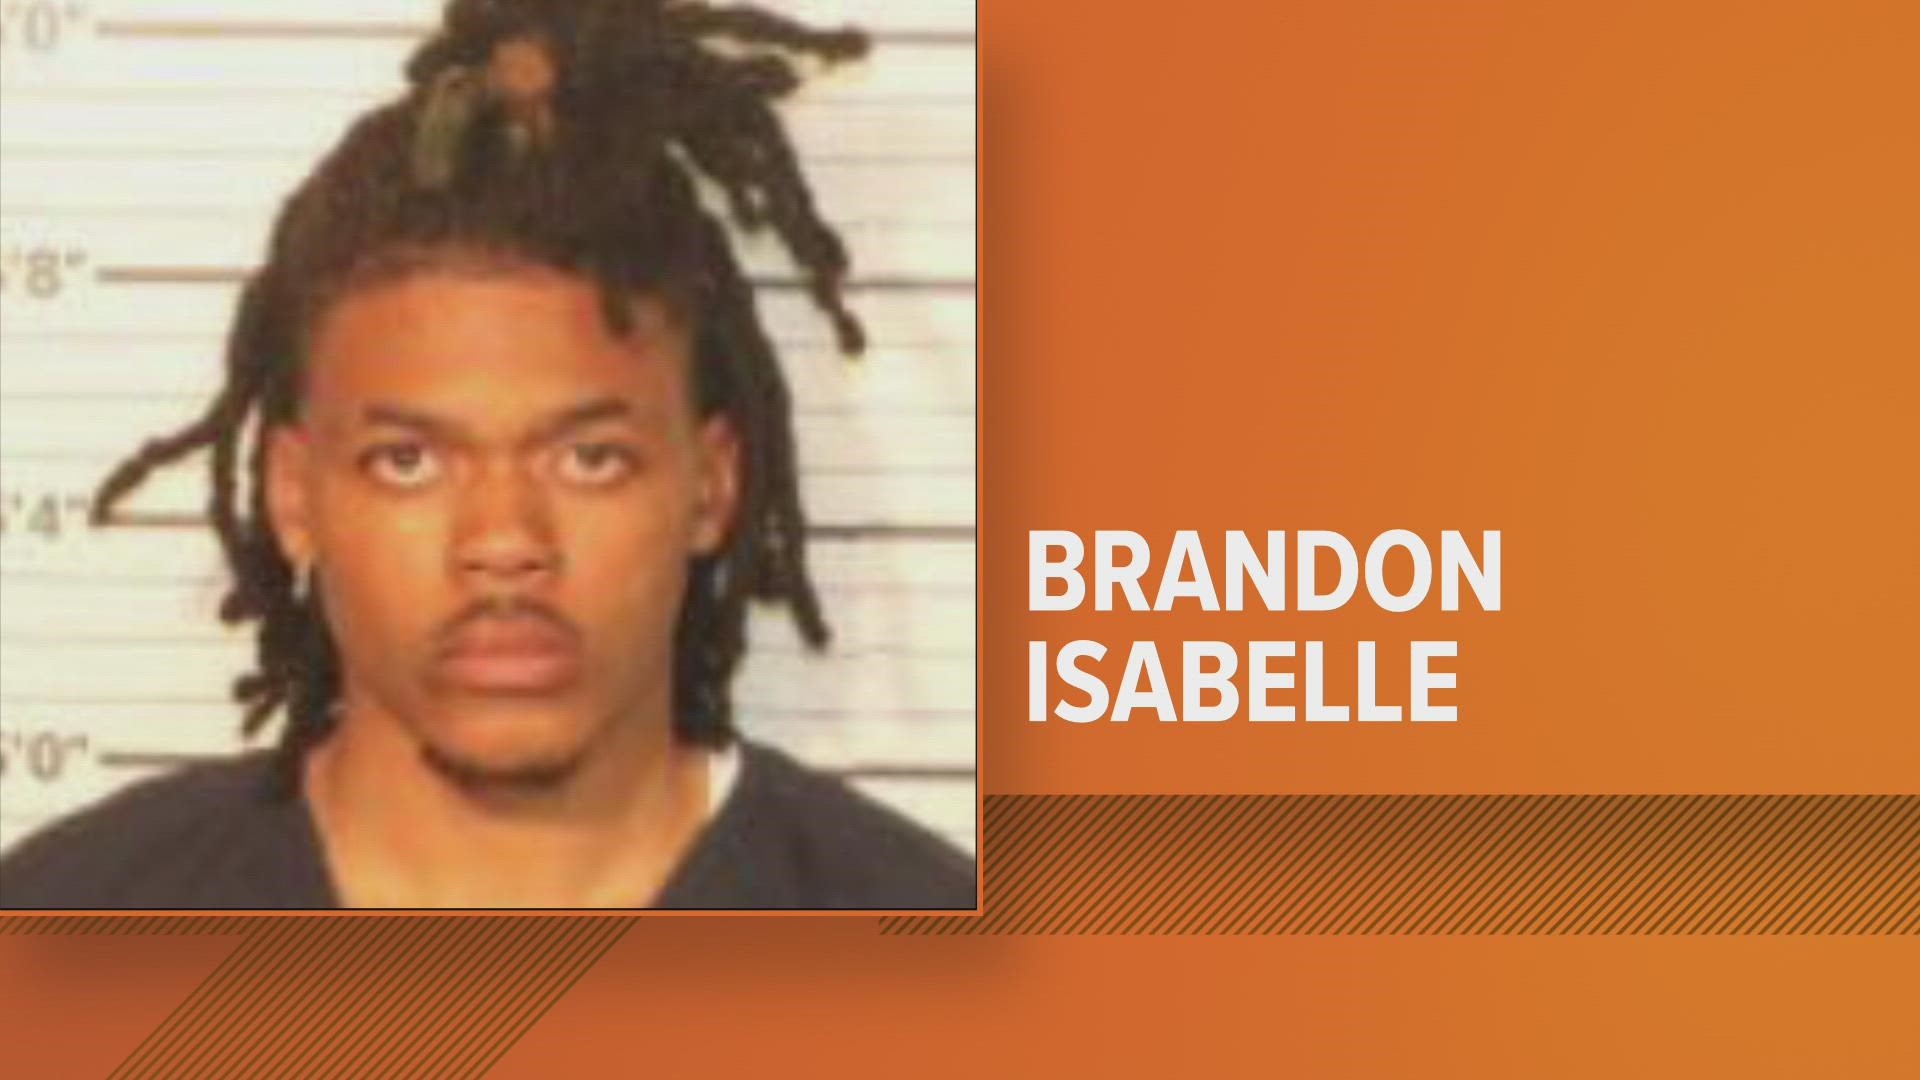 Brandon Isabelle appeared in court, Monday February 7, pleading not guilty to the murder of his child's mother, Danielle Hoyle, and their then 2-day-old baby.